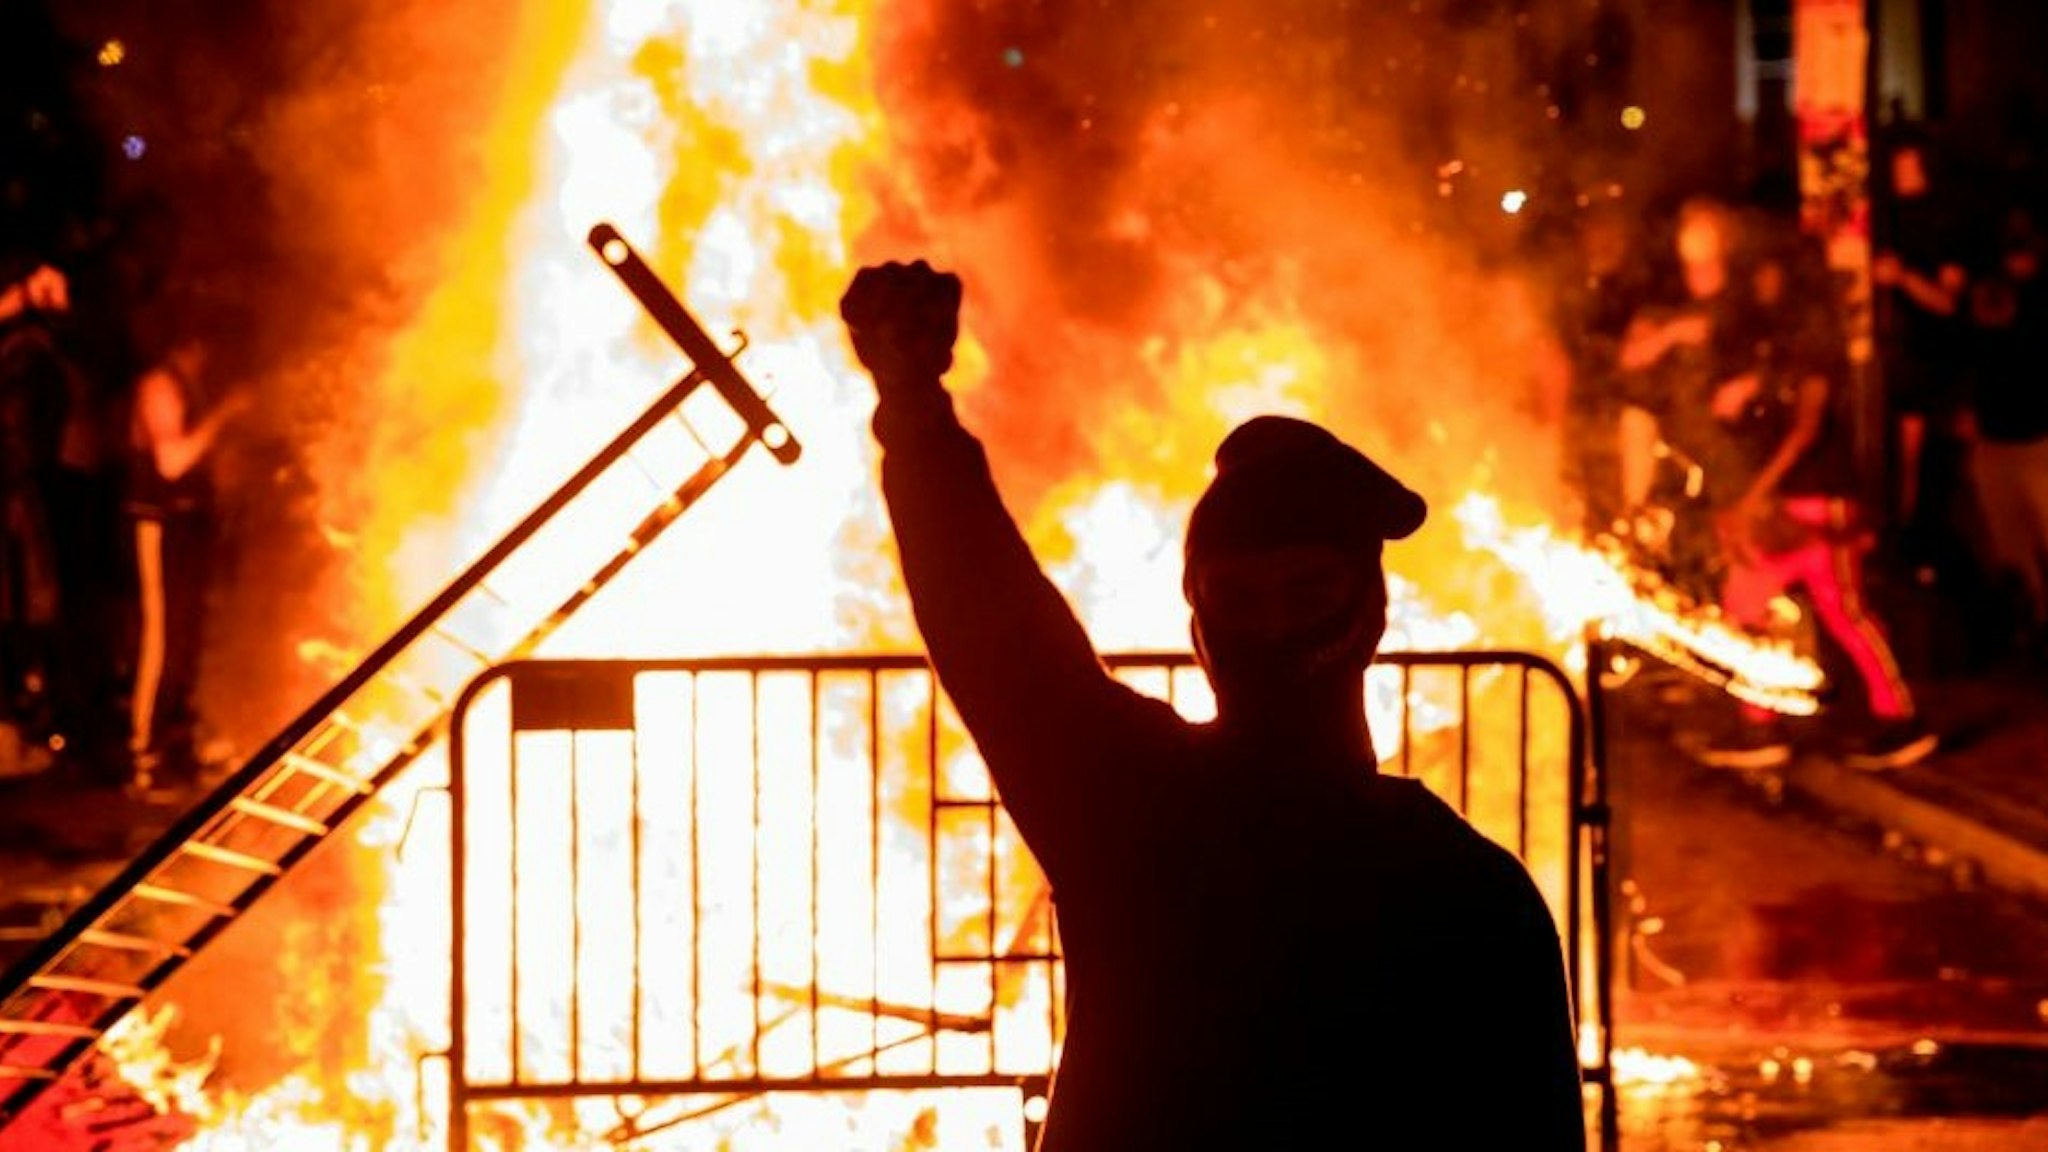 TOPSHOT - A protester raises a fist near a fire during a demonstration outside the White House over the death of George Floyd at the hands of Minneapolis Police in Washington, DC, on May 31, 2020. - Thousands of National Guard troops patrolled major US cities after five consecutive nights of protests over racism and police brutality that boiled over into arson and looting, sending shock waves through the country. The death Monday of an unarmed black man, George Floyd, at the hands of police in Minneapolis ignited this latest wave of outrage in the US over law enforcement's repeated use of lethal force against African Americans -- this one like others before captured on cellphone video. (Photo by Samuel Corum / AFP) (Photo by S